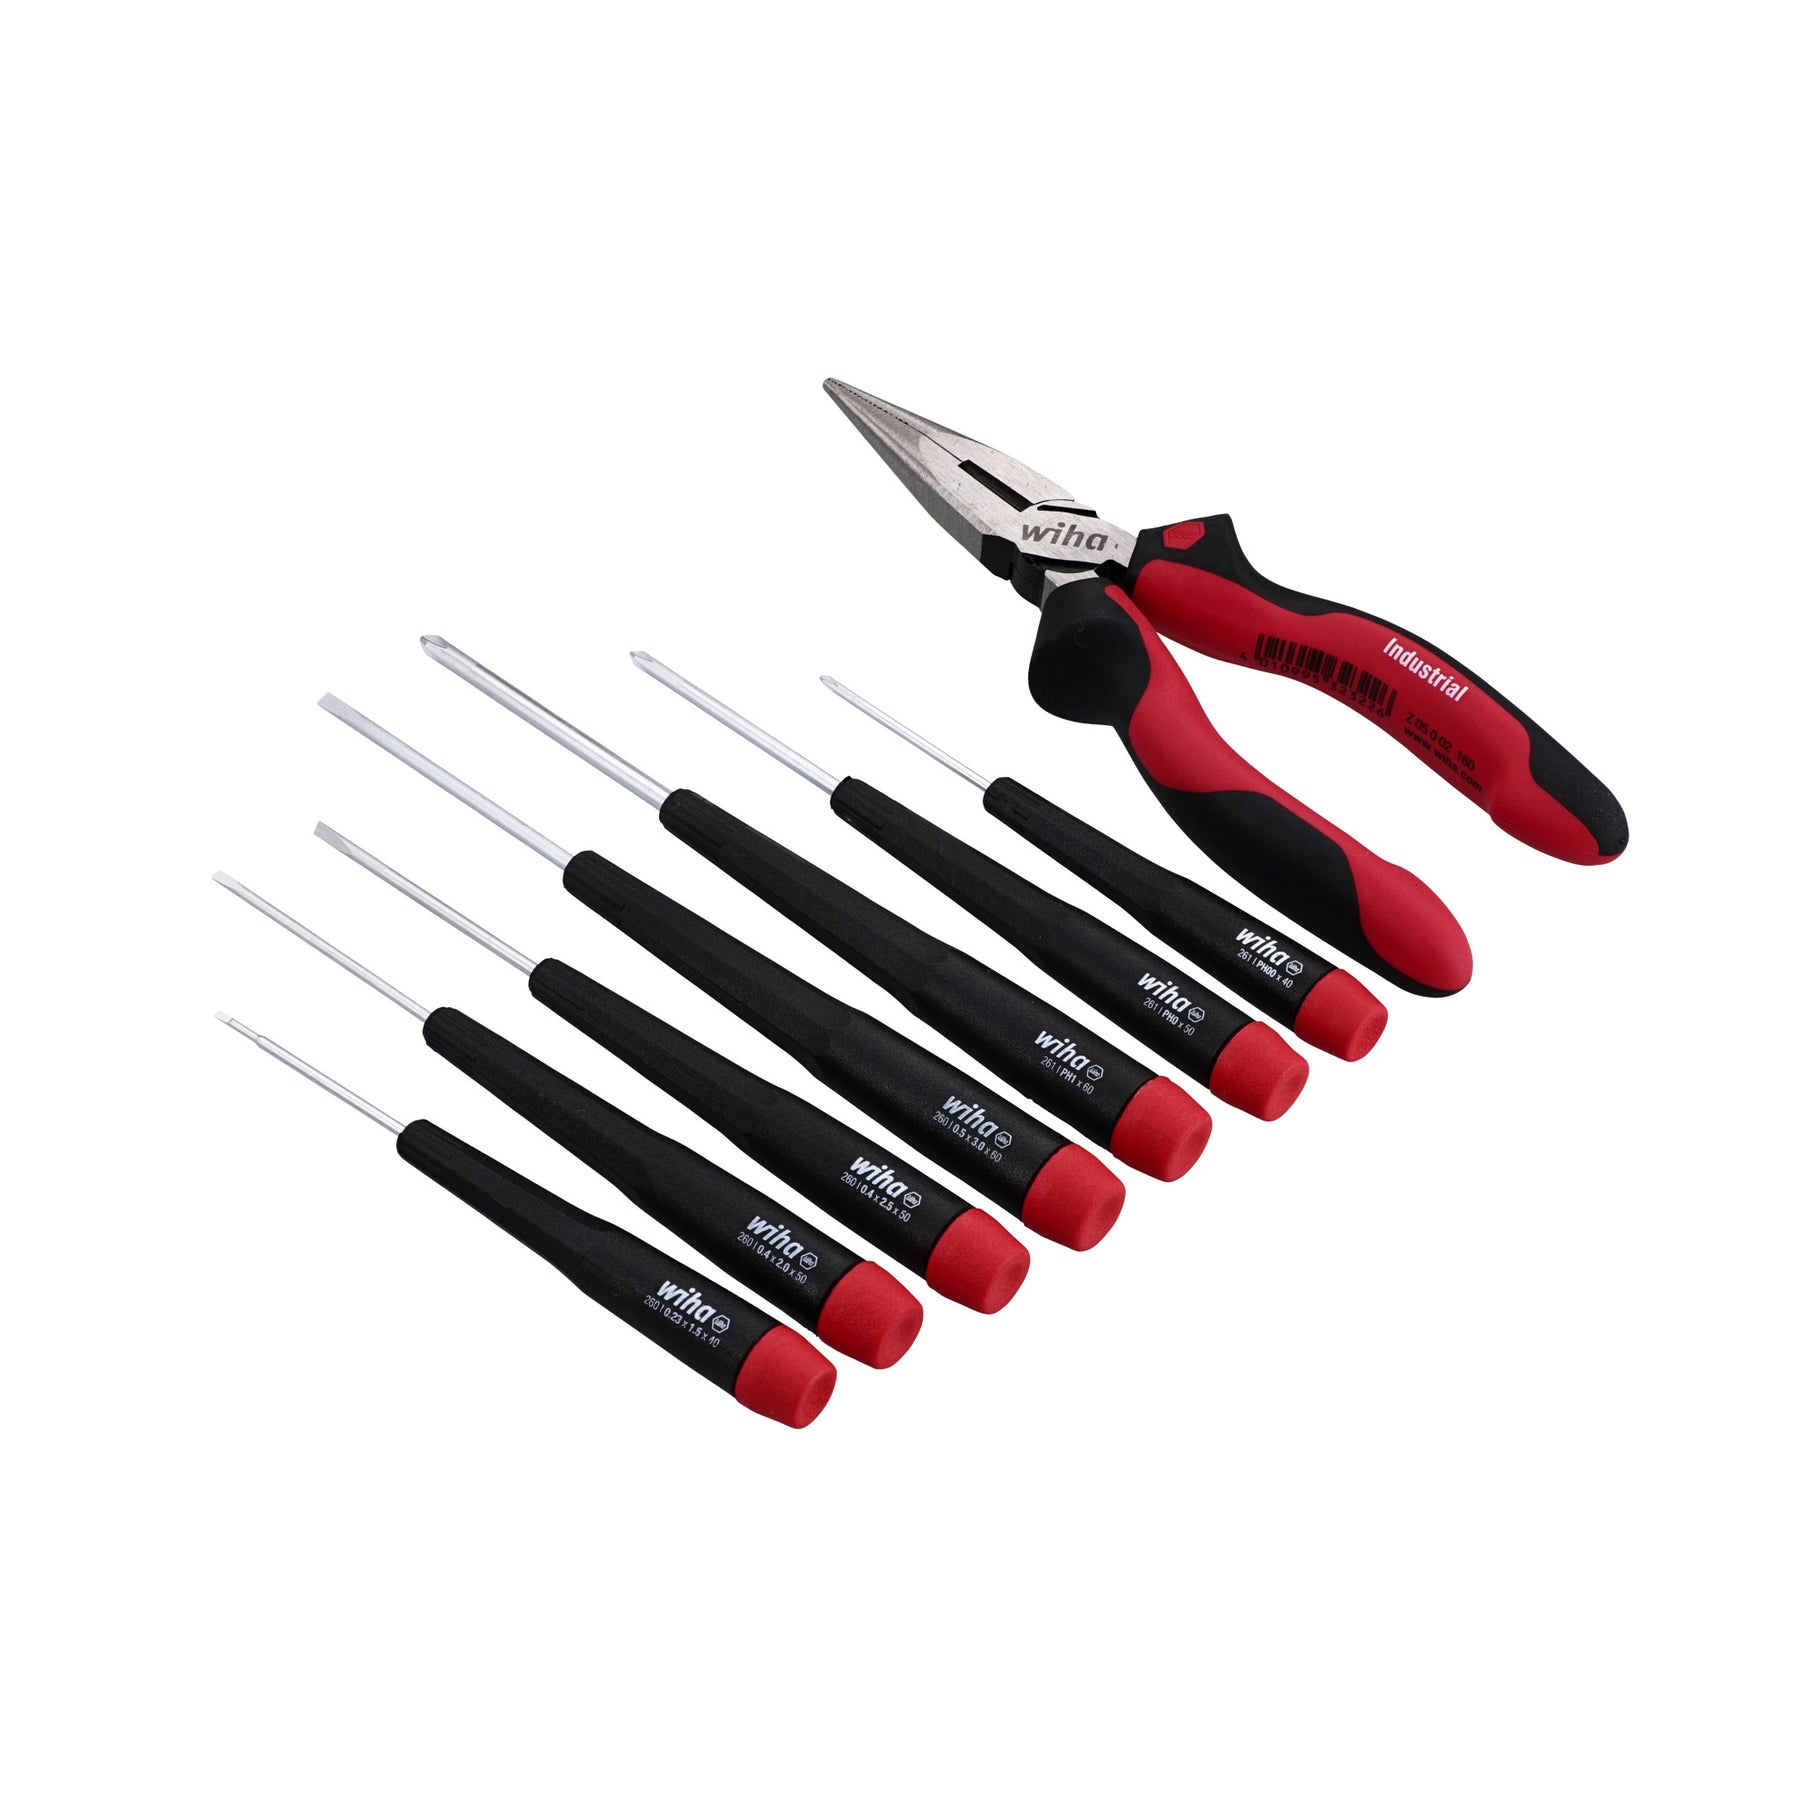 8 Piece Precision Slotted and Phillips Screwdrivers and Pliers Set